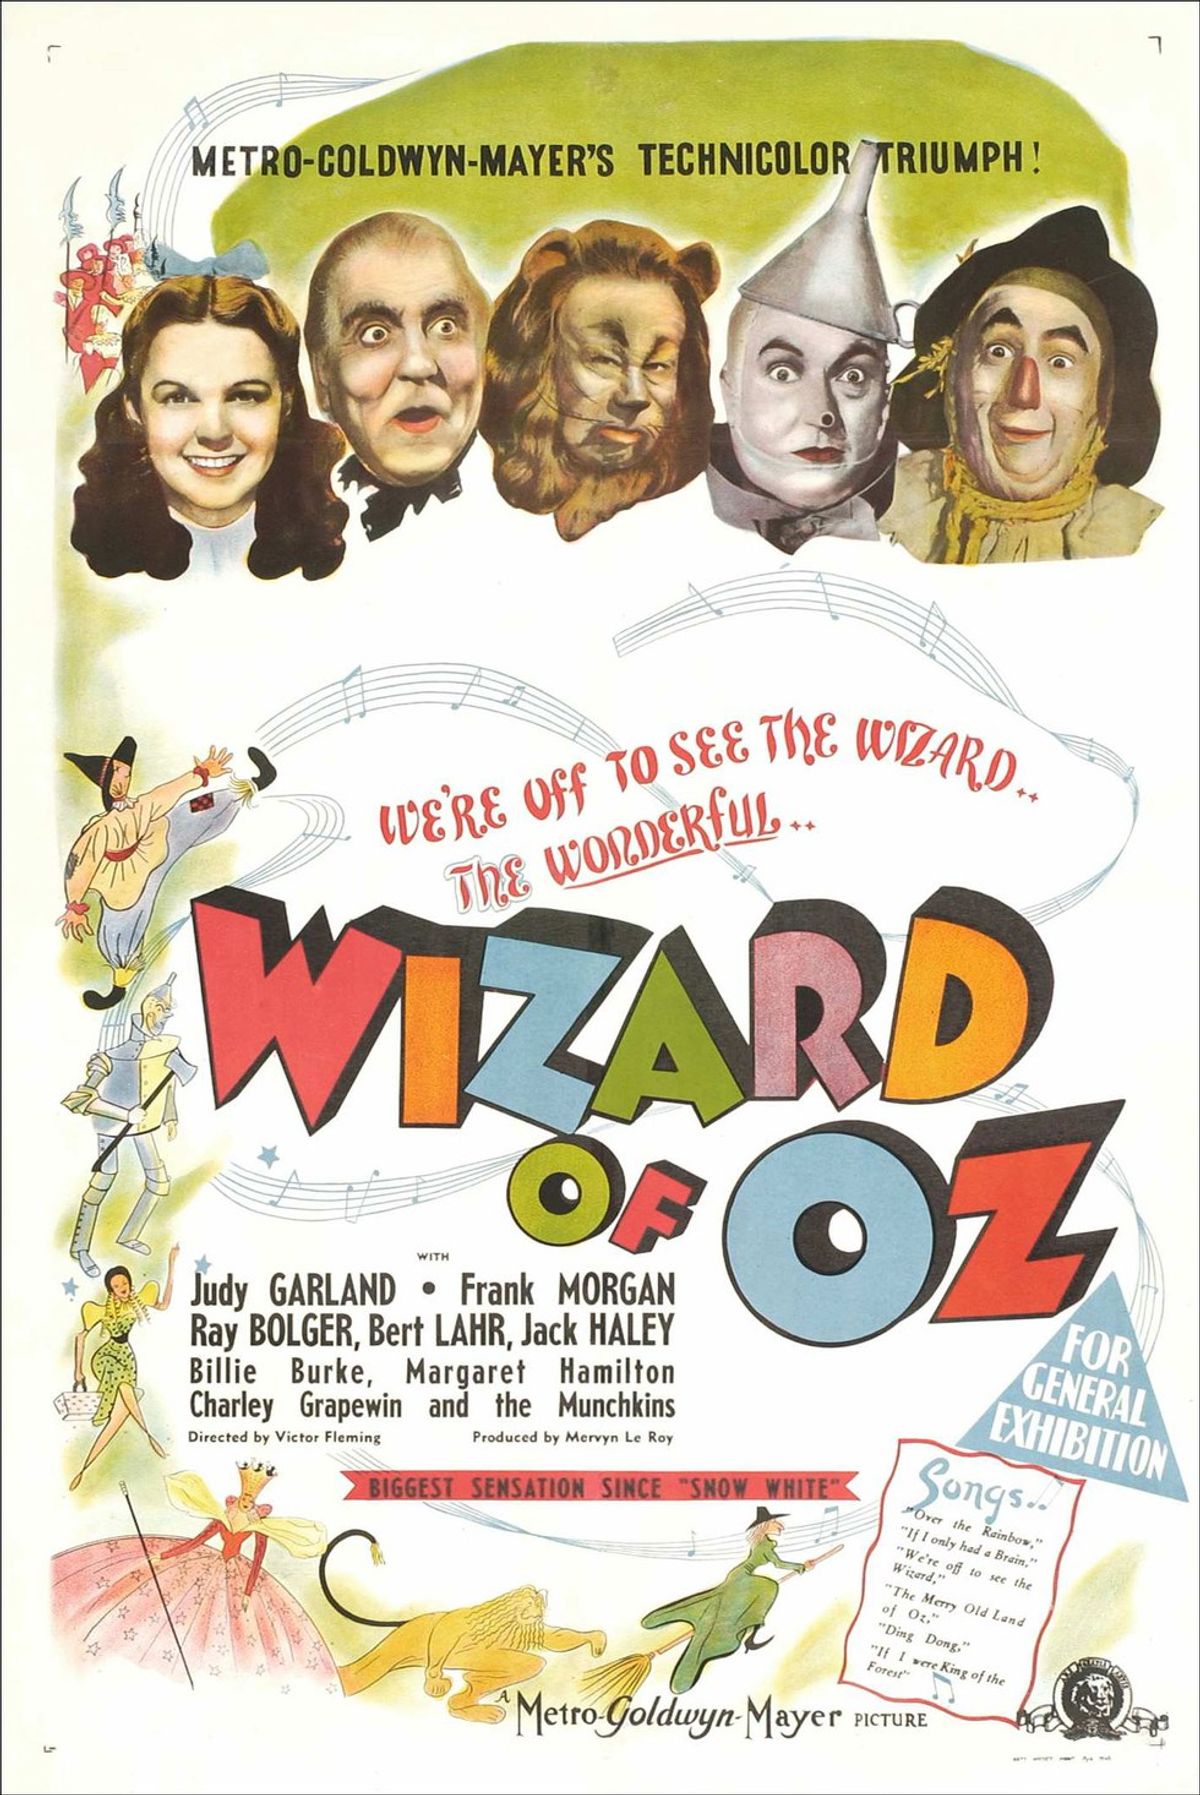 7 Life Lessons We Learned From 'The Wizard Of Oz'